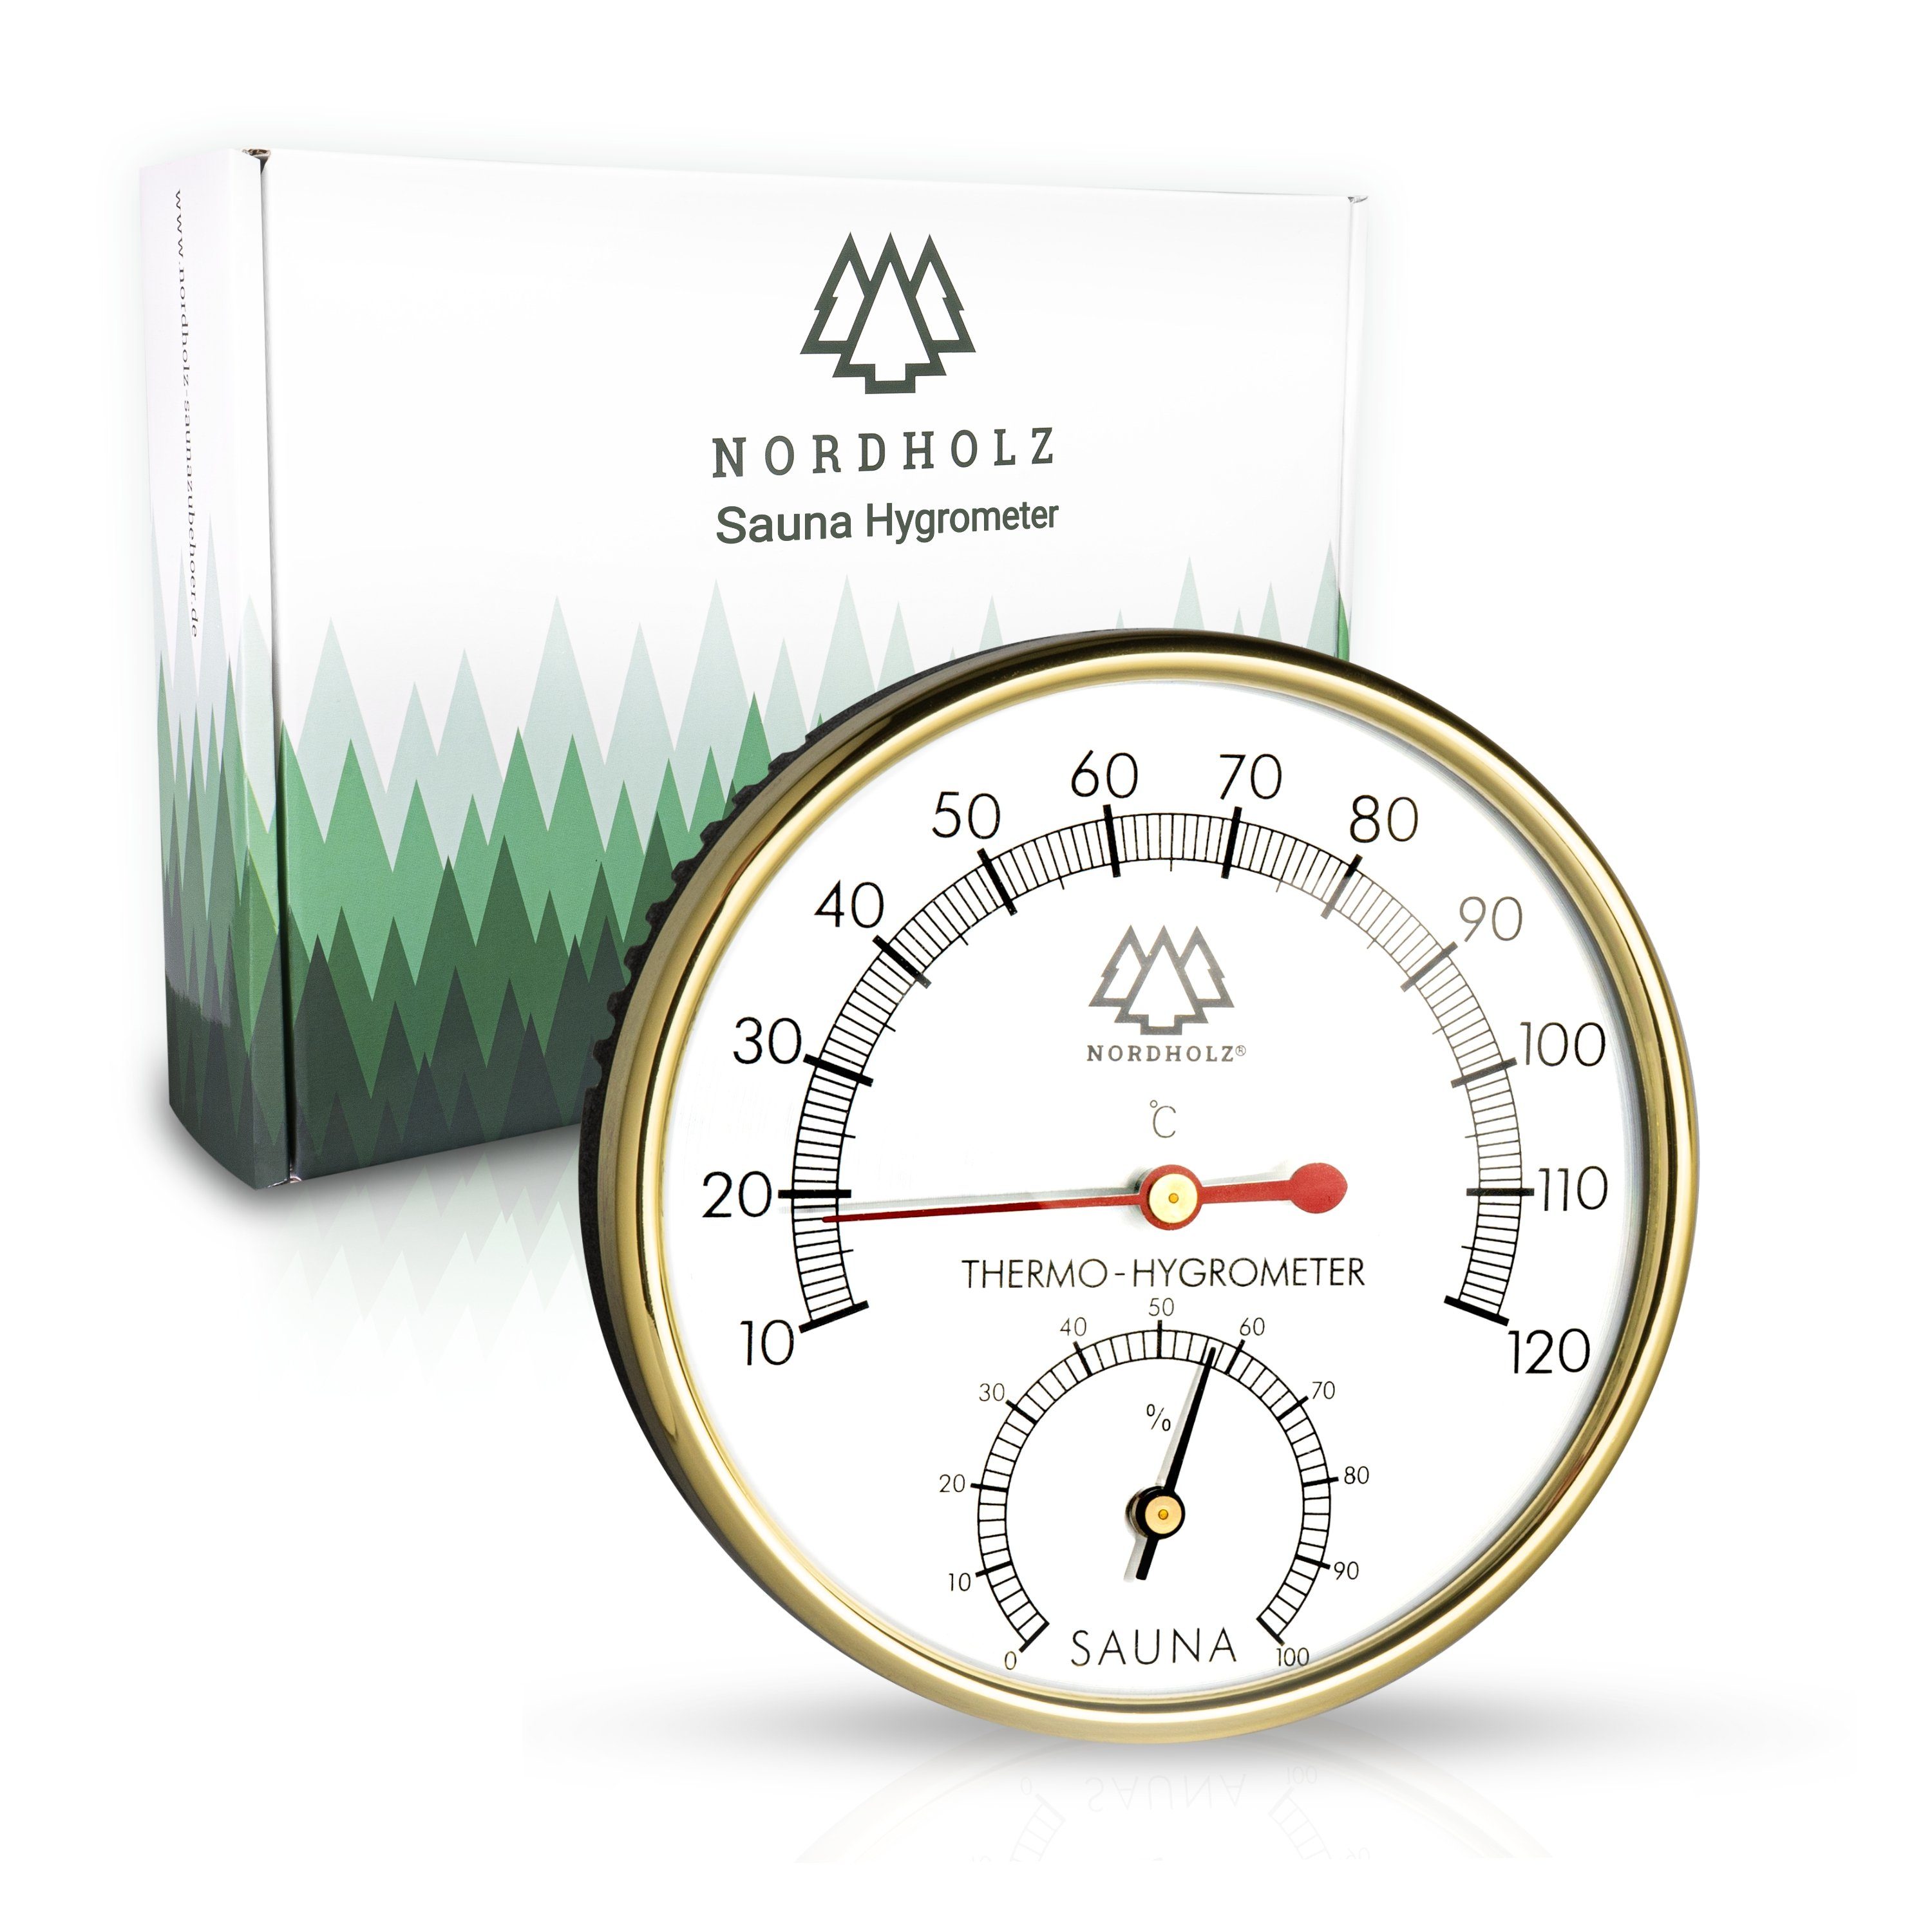 NORDHOLZ Raumthermometer Sauna Thermometer Hygrometer, 2in1 1-tlg